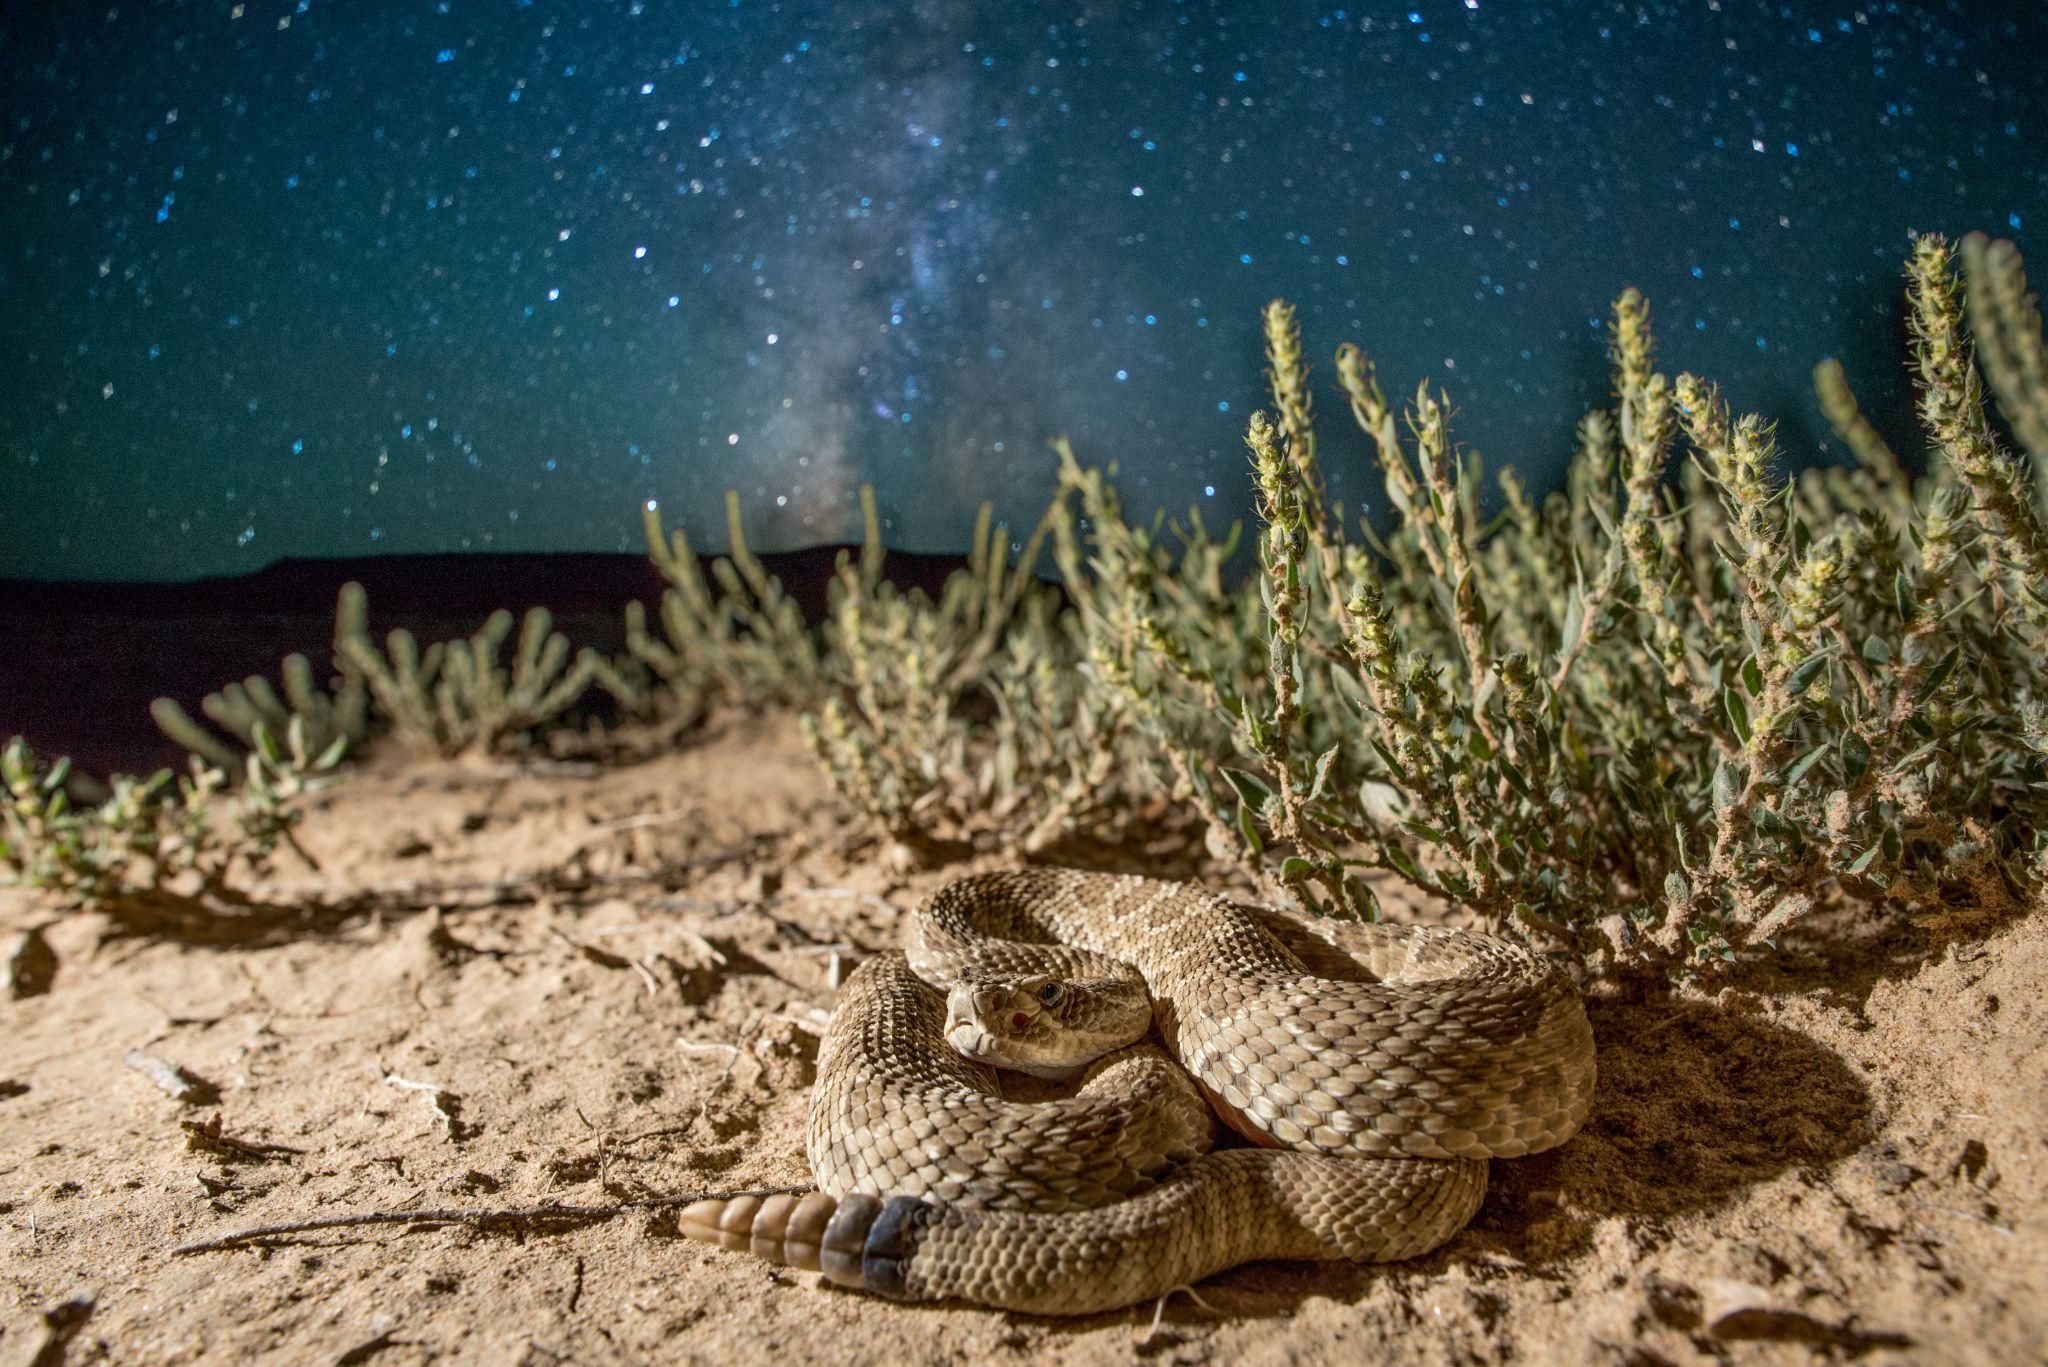 One of the most commonly encountered snakes in New Mexico, this prairie rattlesnake lies in ambush awaiting a rodent or other small prey under the New Mexico night sky. 